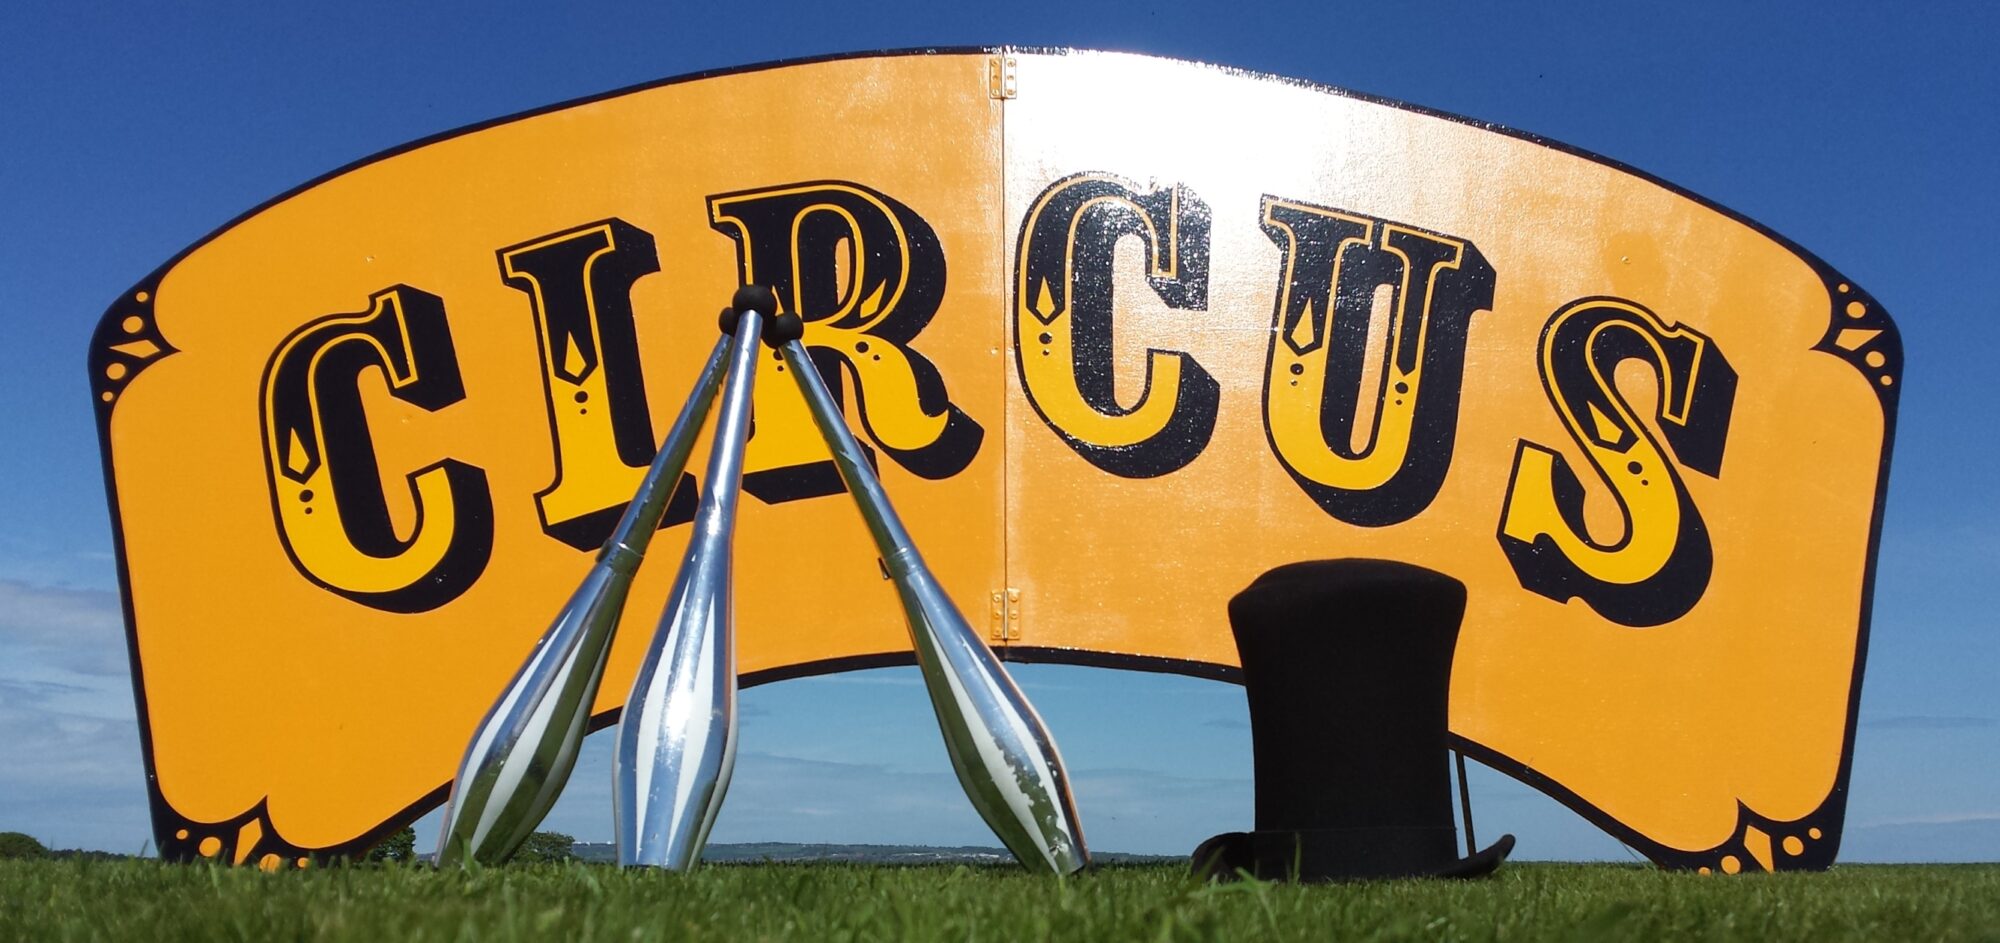 circus sign for circus skills workshops / team building